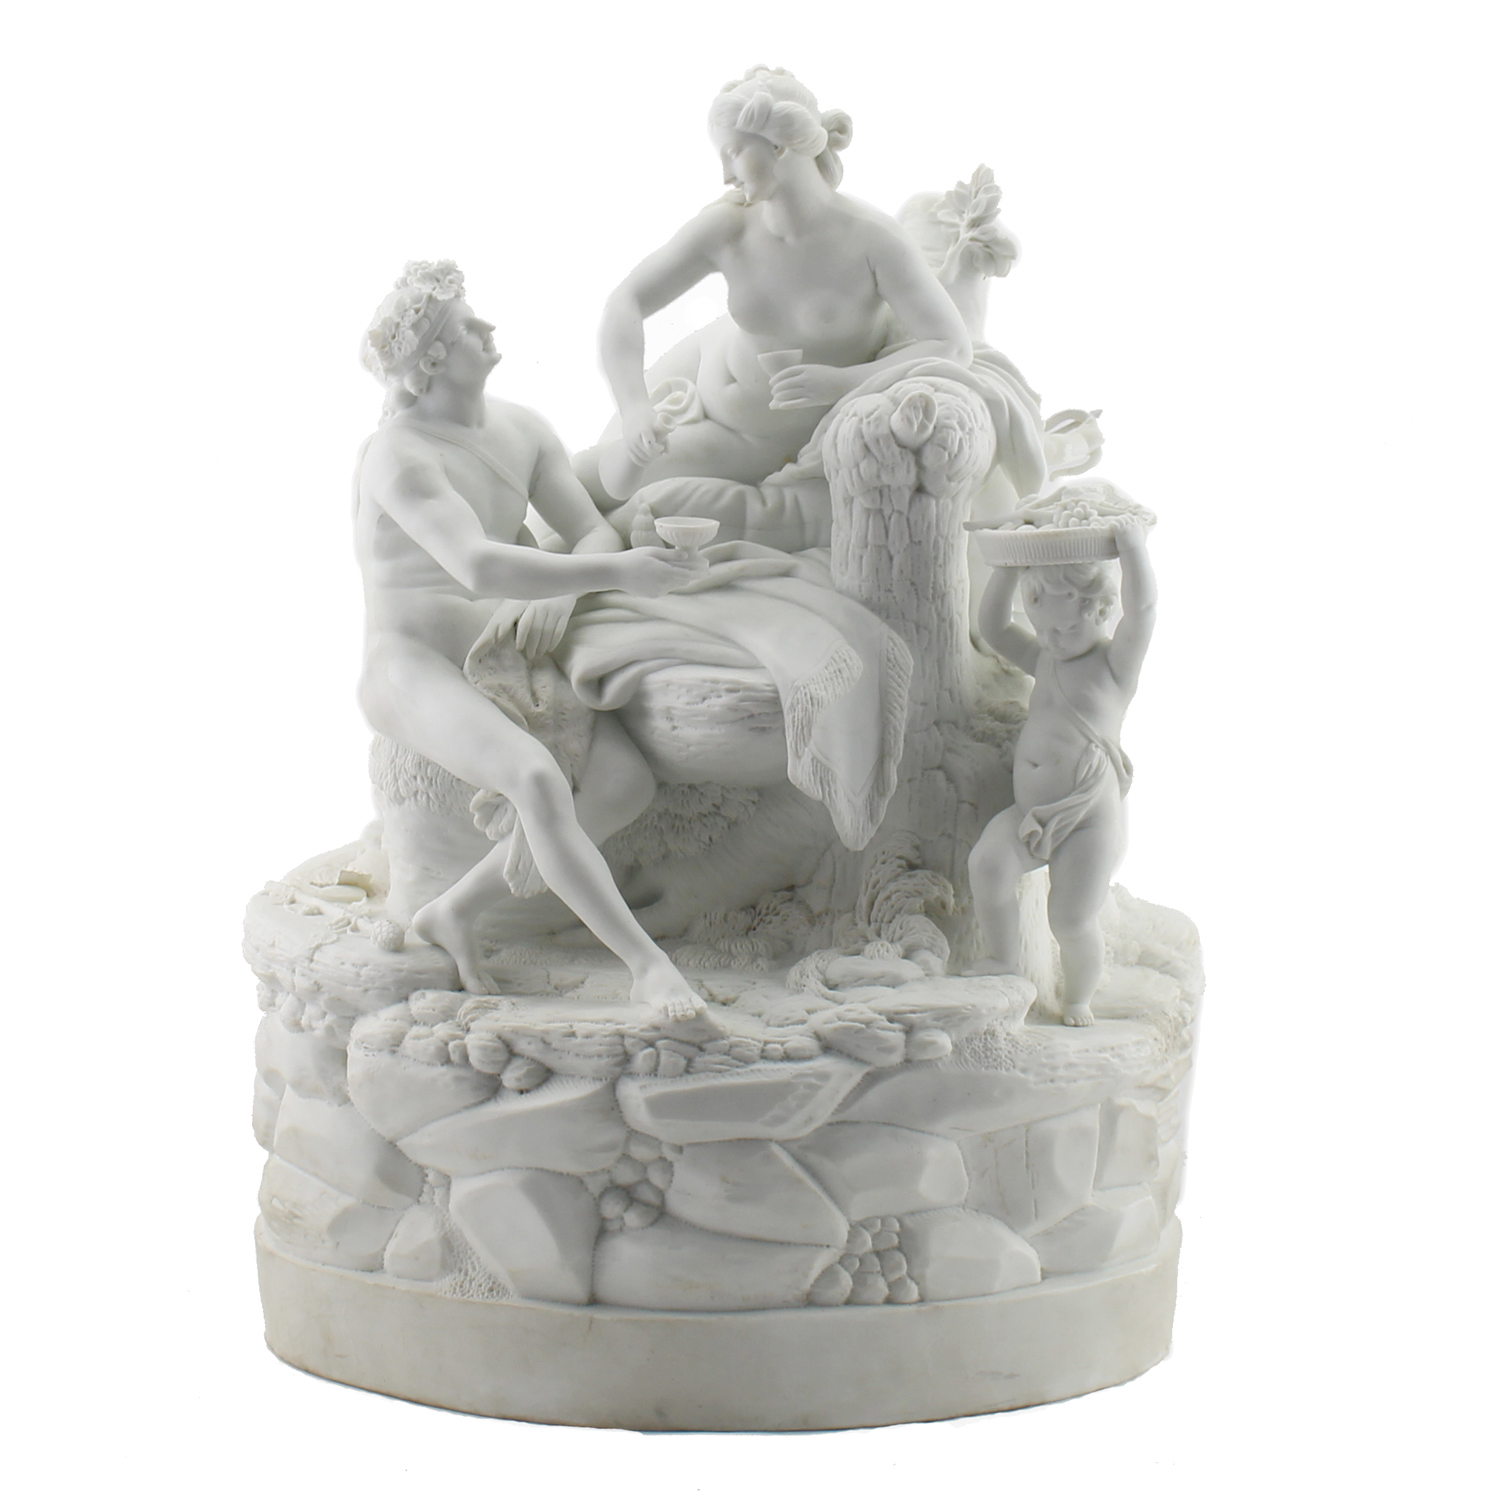 Niderviller White Bisque Porcelain Baccanale Figure Group, Late 18th Century